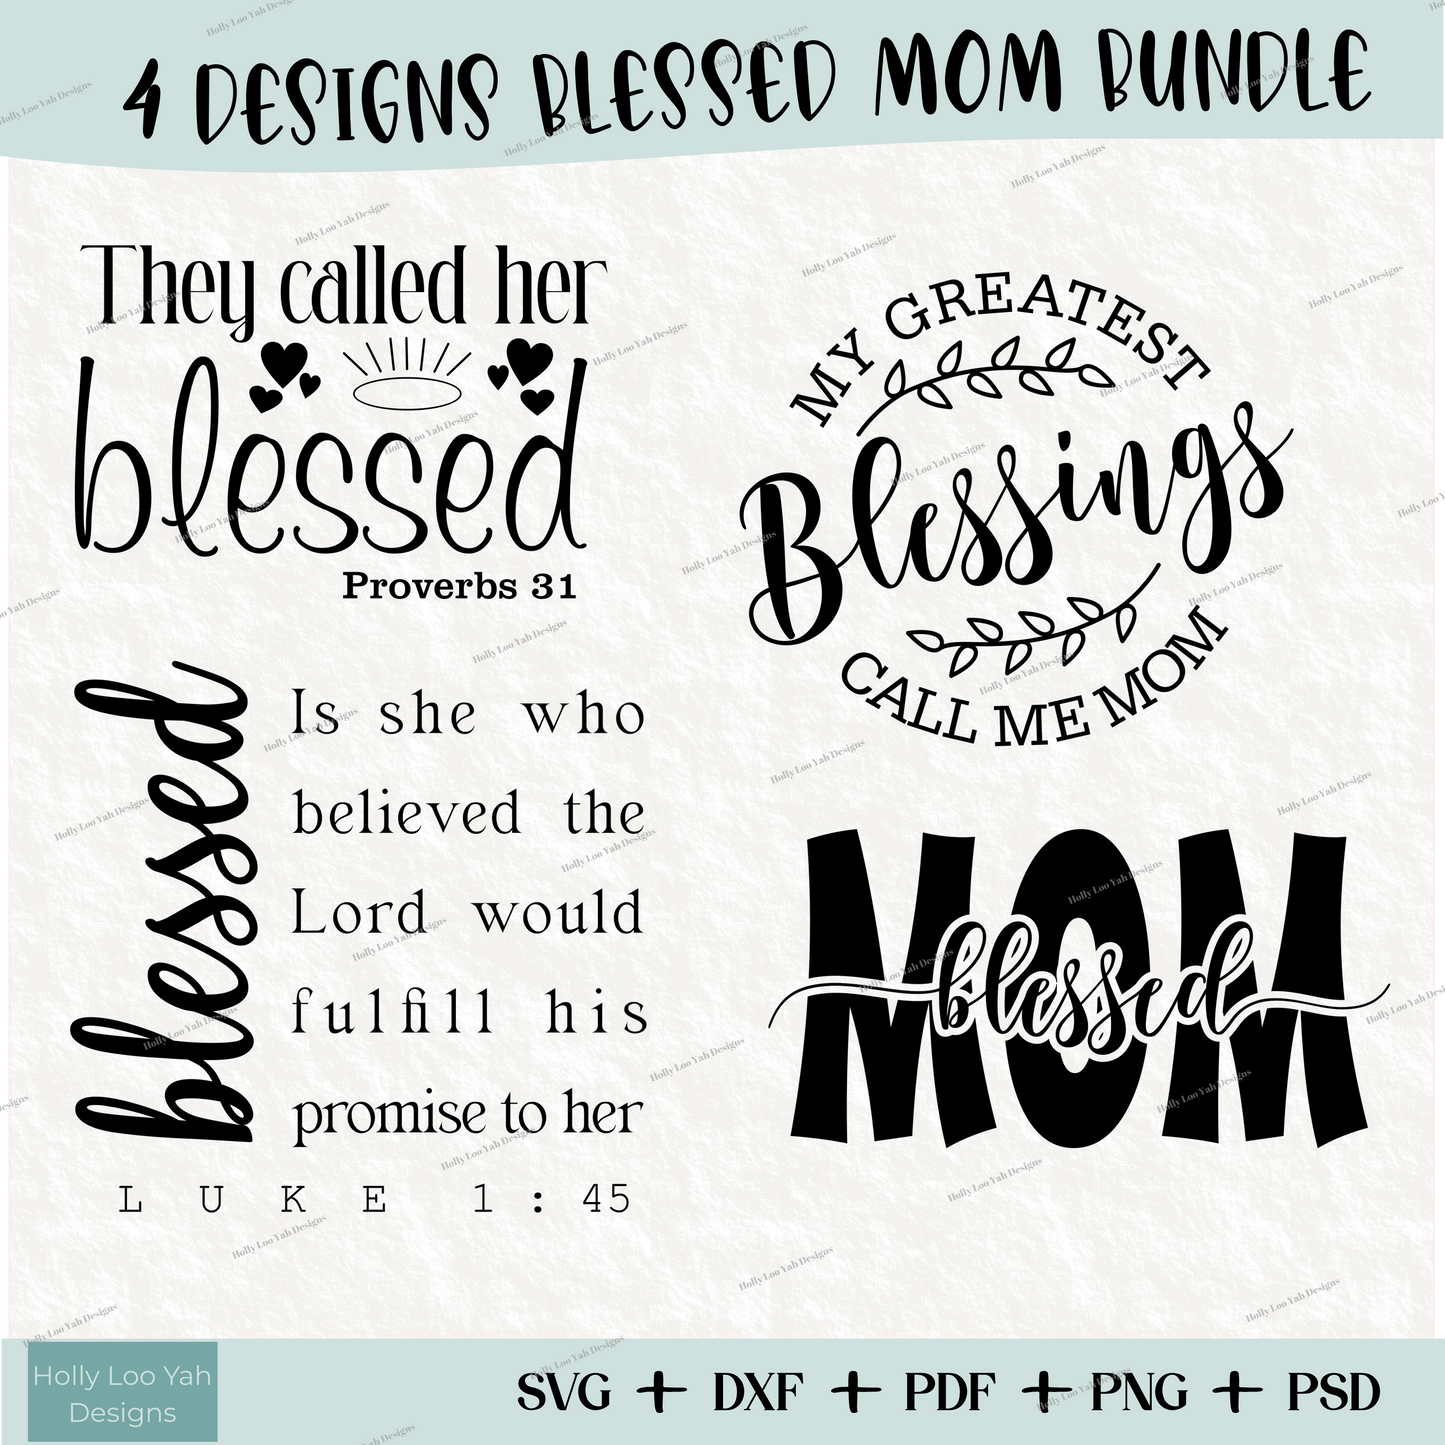 SVG, DXF, PDF, PNG, PSD available for 4 designs including: Blessed Mom, They Called her blessed Proverbs 31, my greatest blessings call me mom, Luke 1:45 bible verse